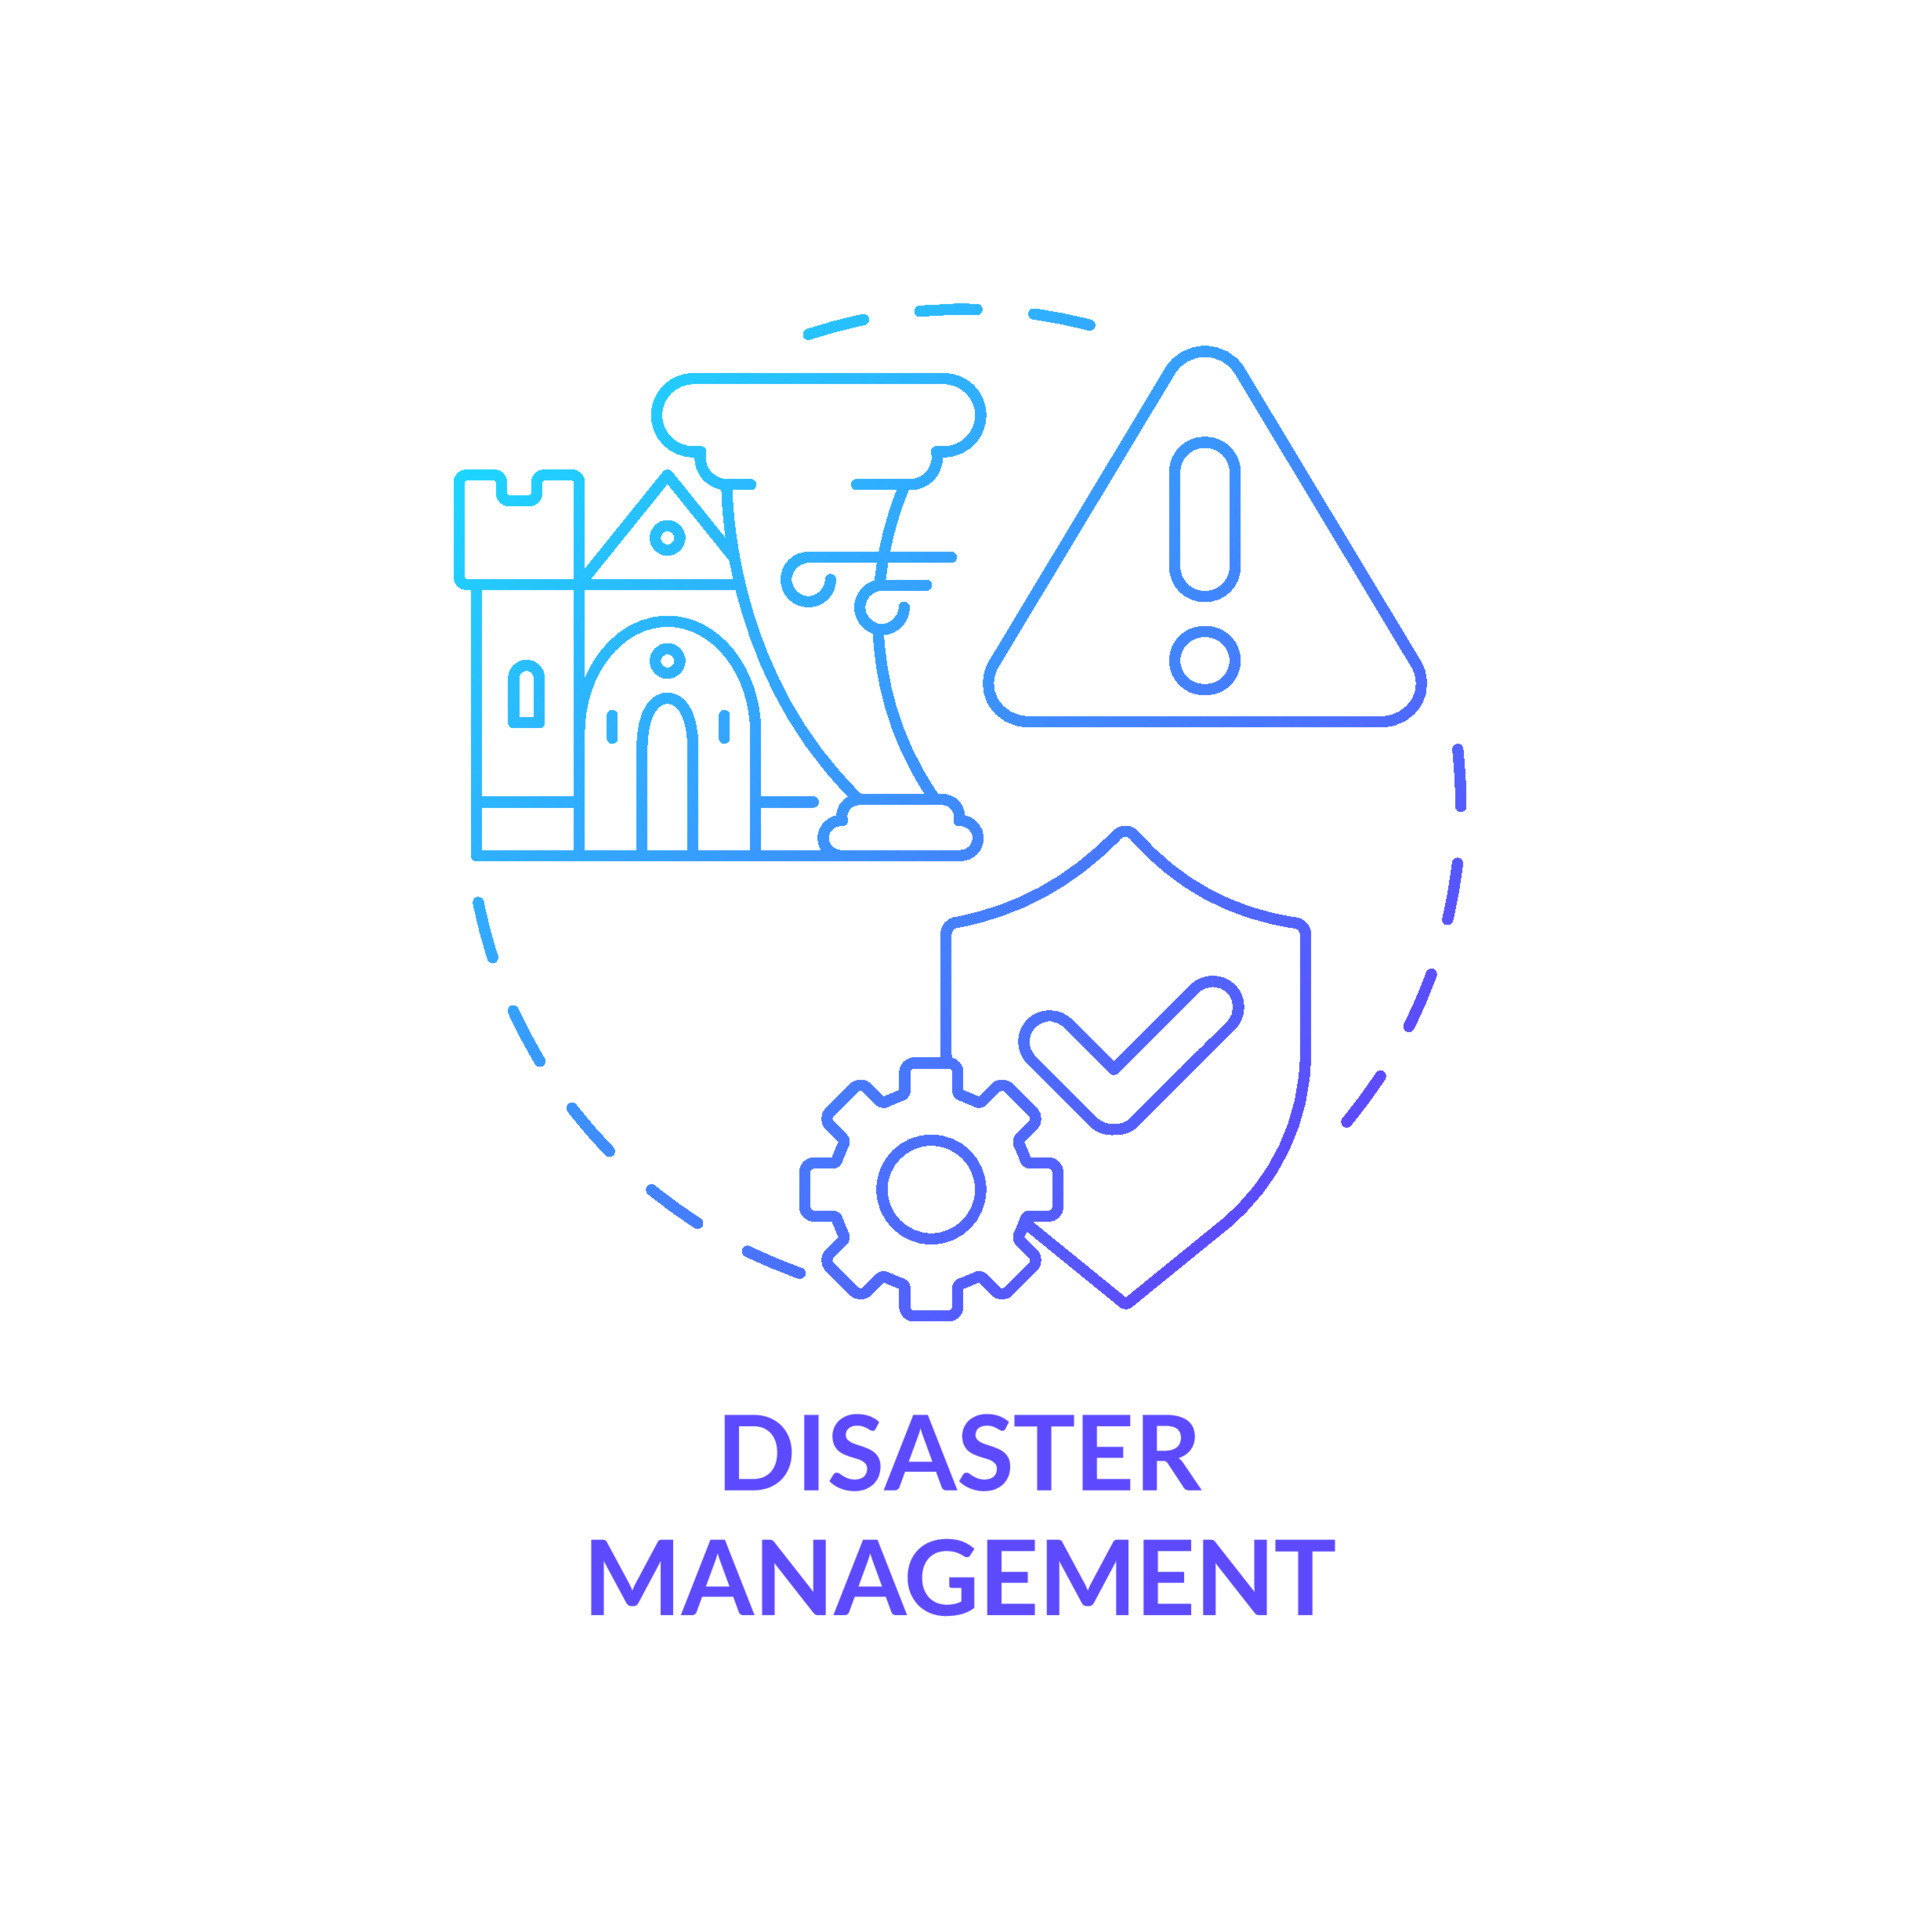 4 Phases of Disaster Management Explained the Easy Way  AkitaBox